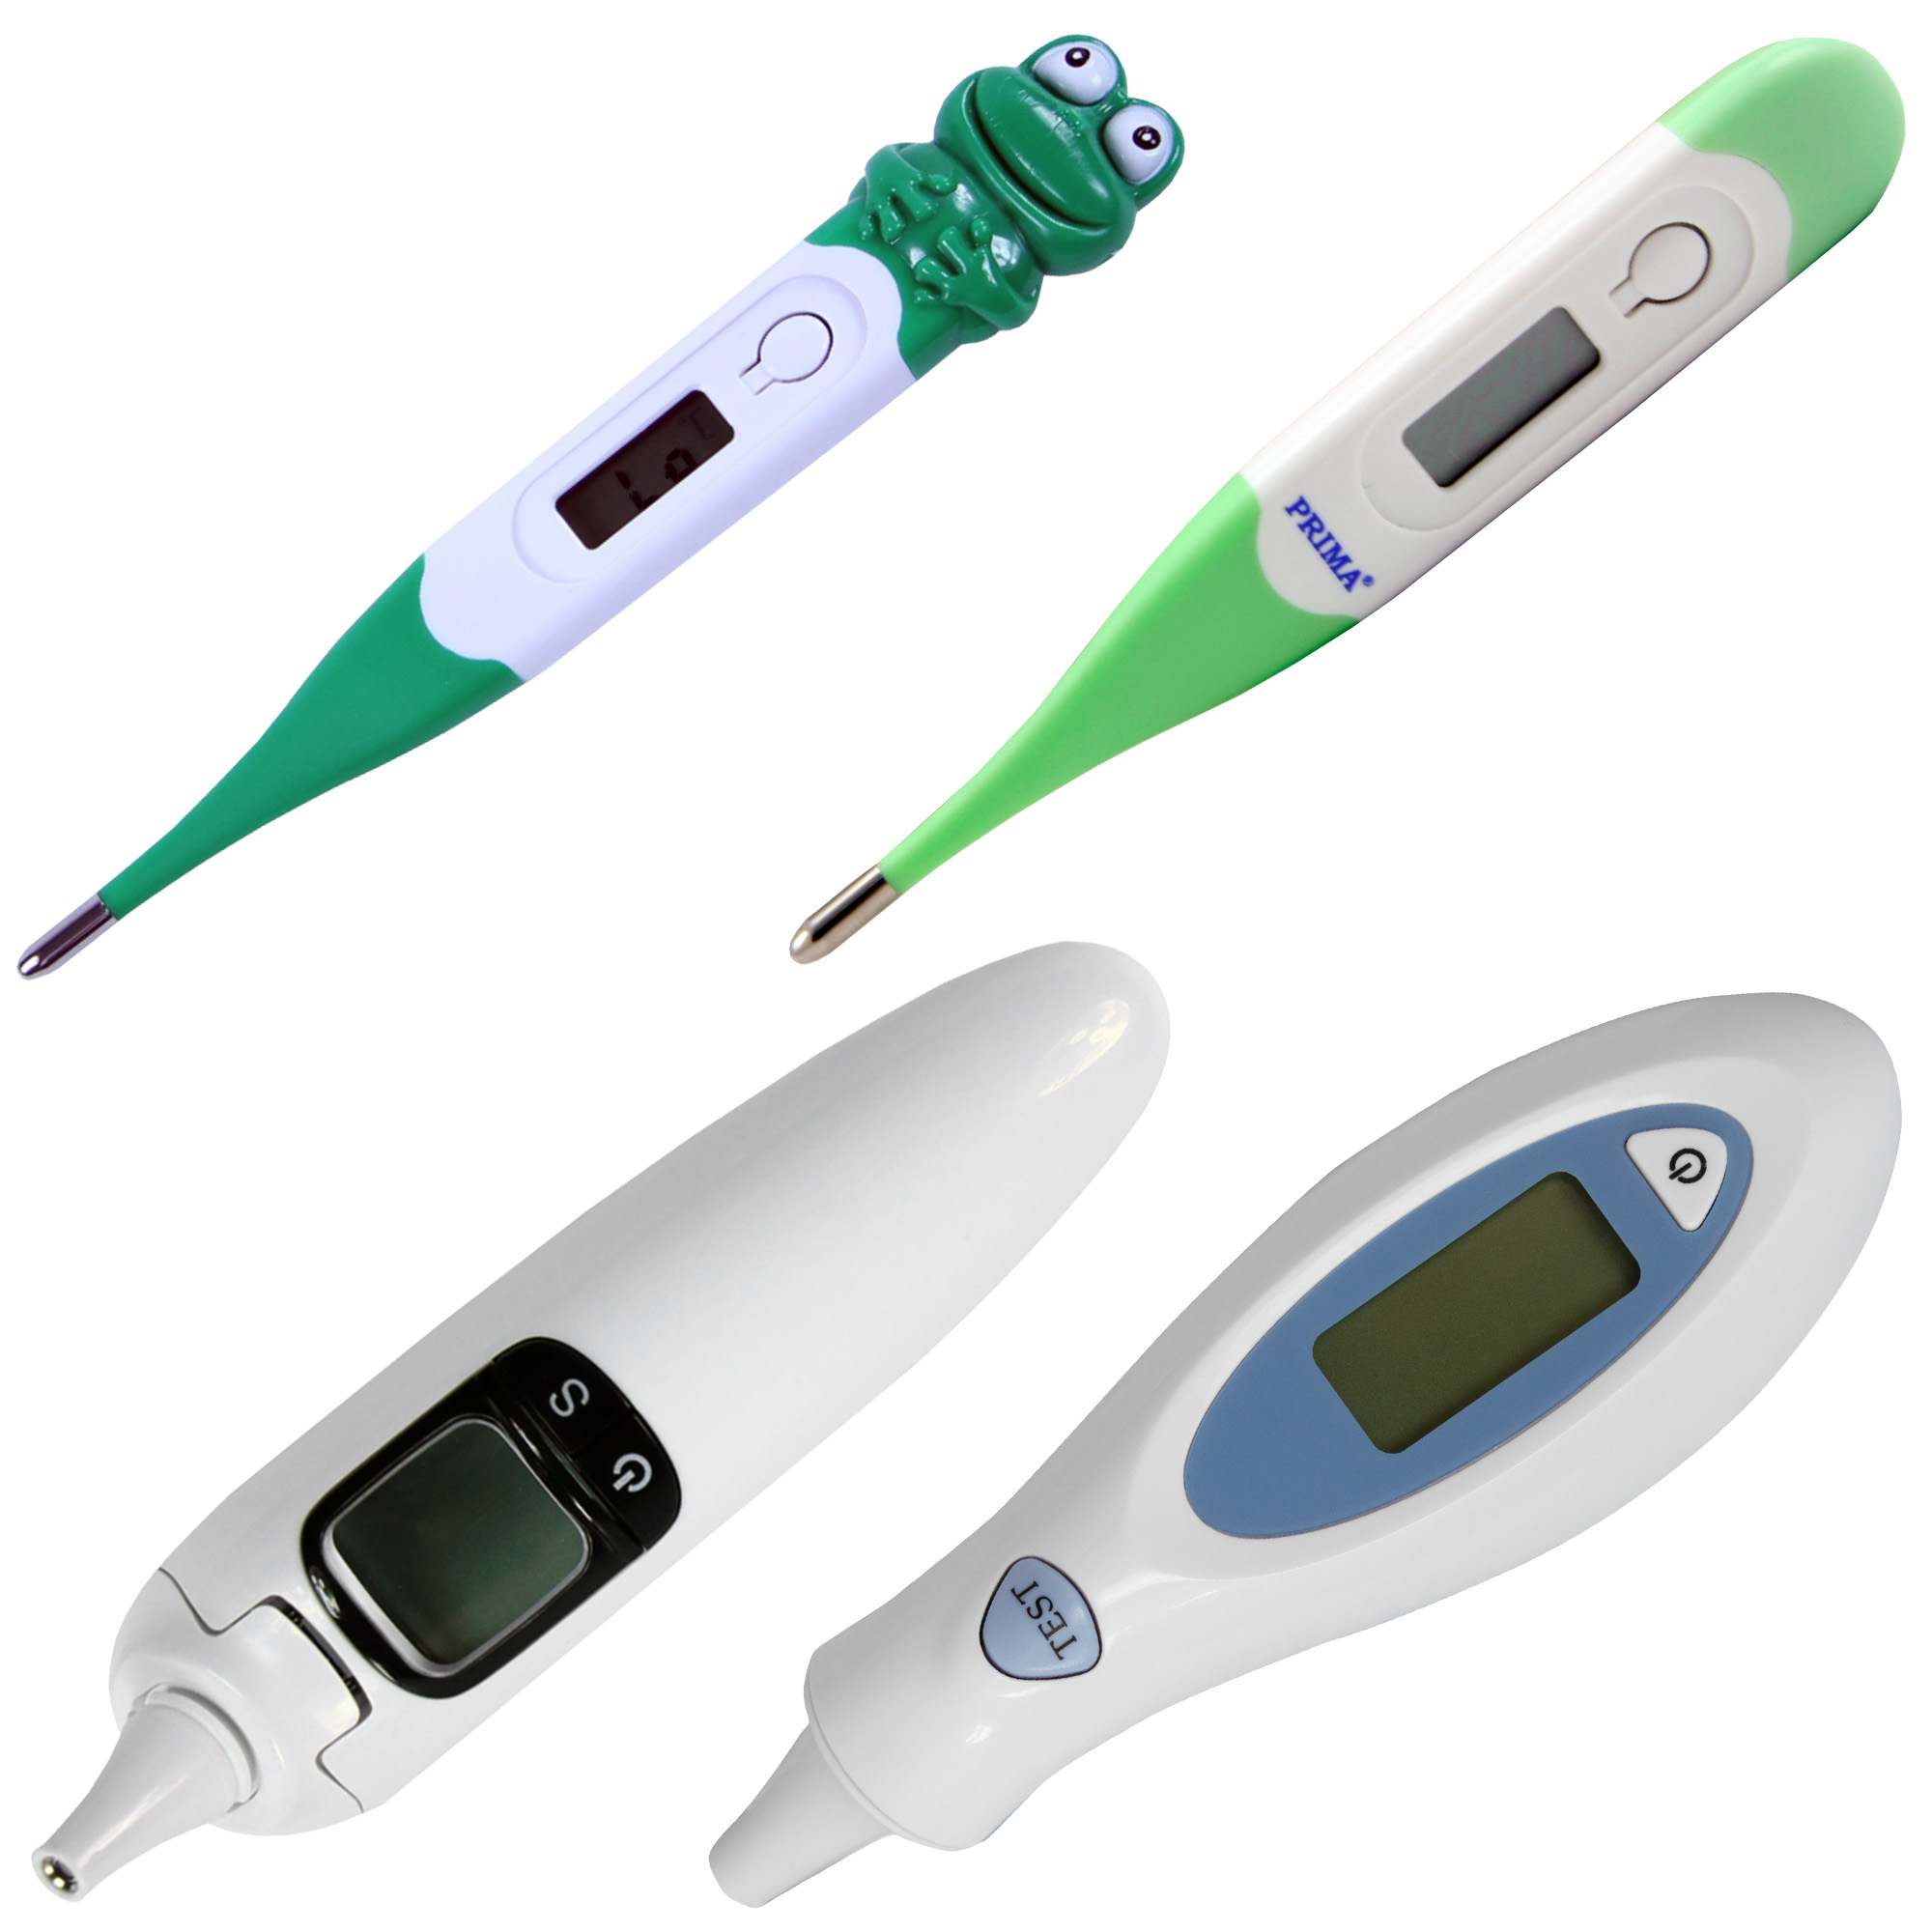 Medical practice/HEALTH MONITORING DEVICES/Digital Thermometers